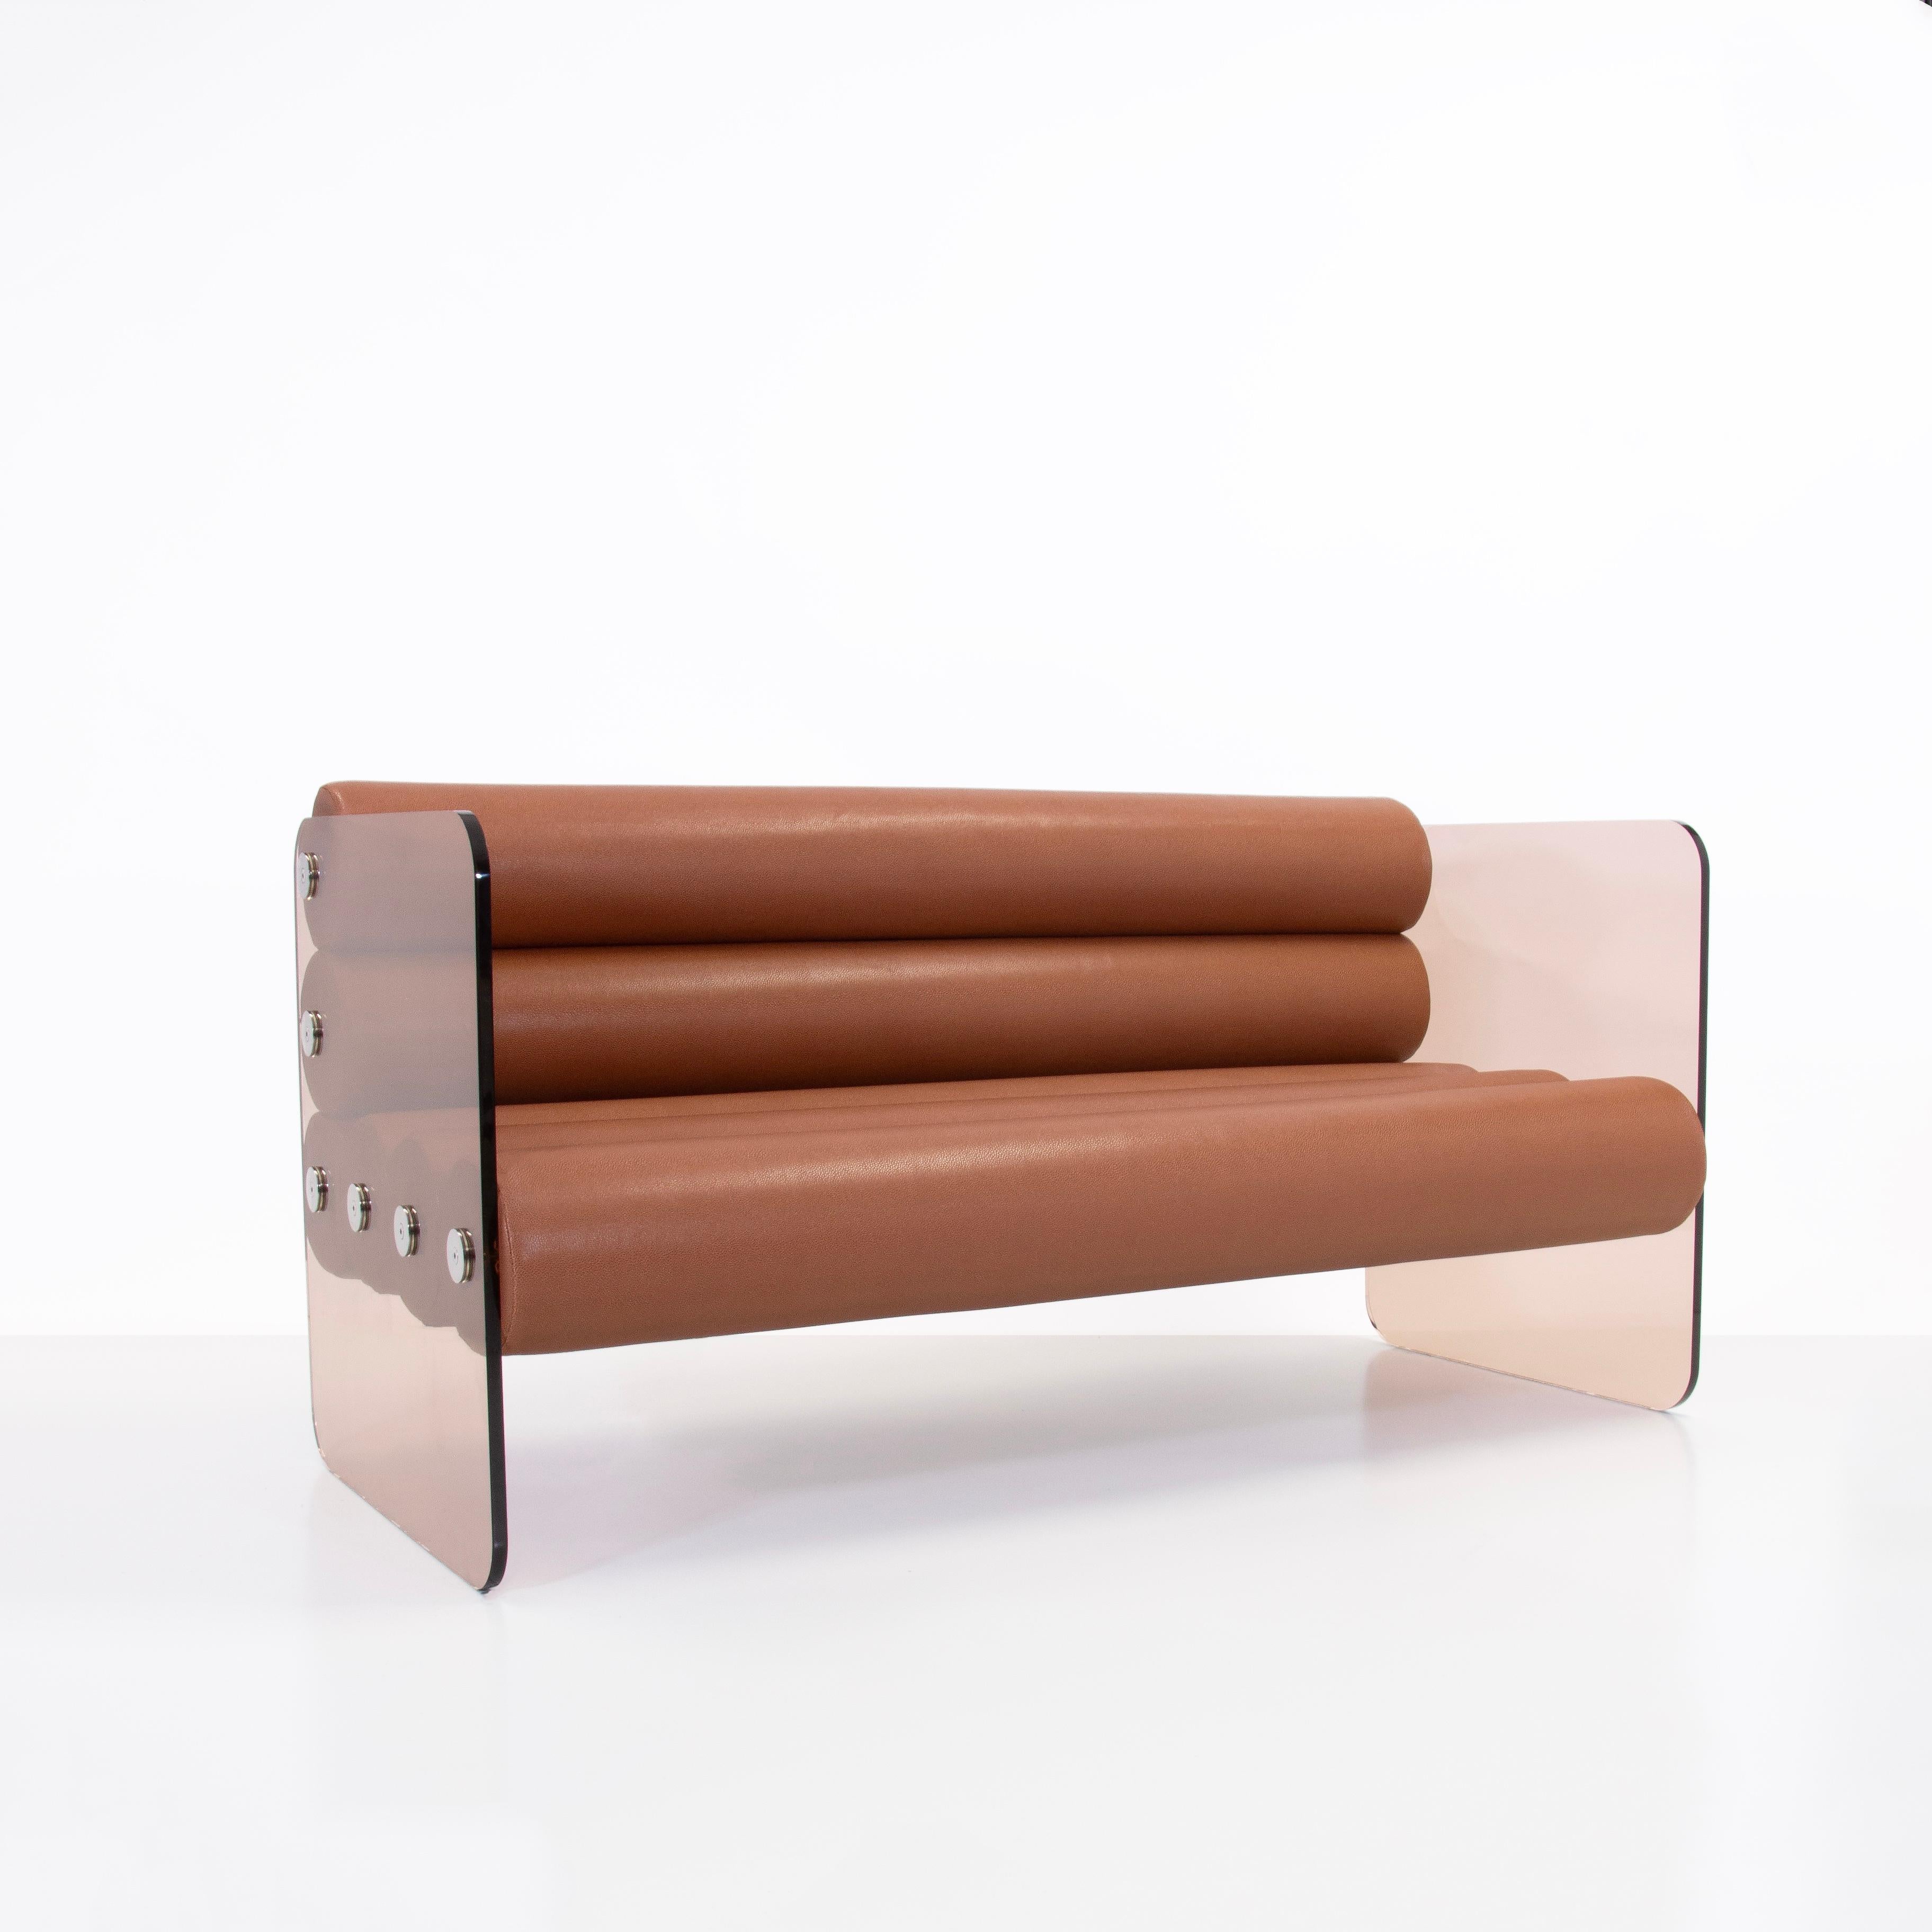 Stainless Steel Design sofa Mw01 Bronze, made in France, designed by Olivier Santini For Sale